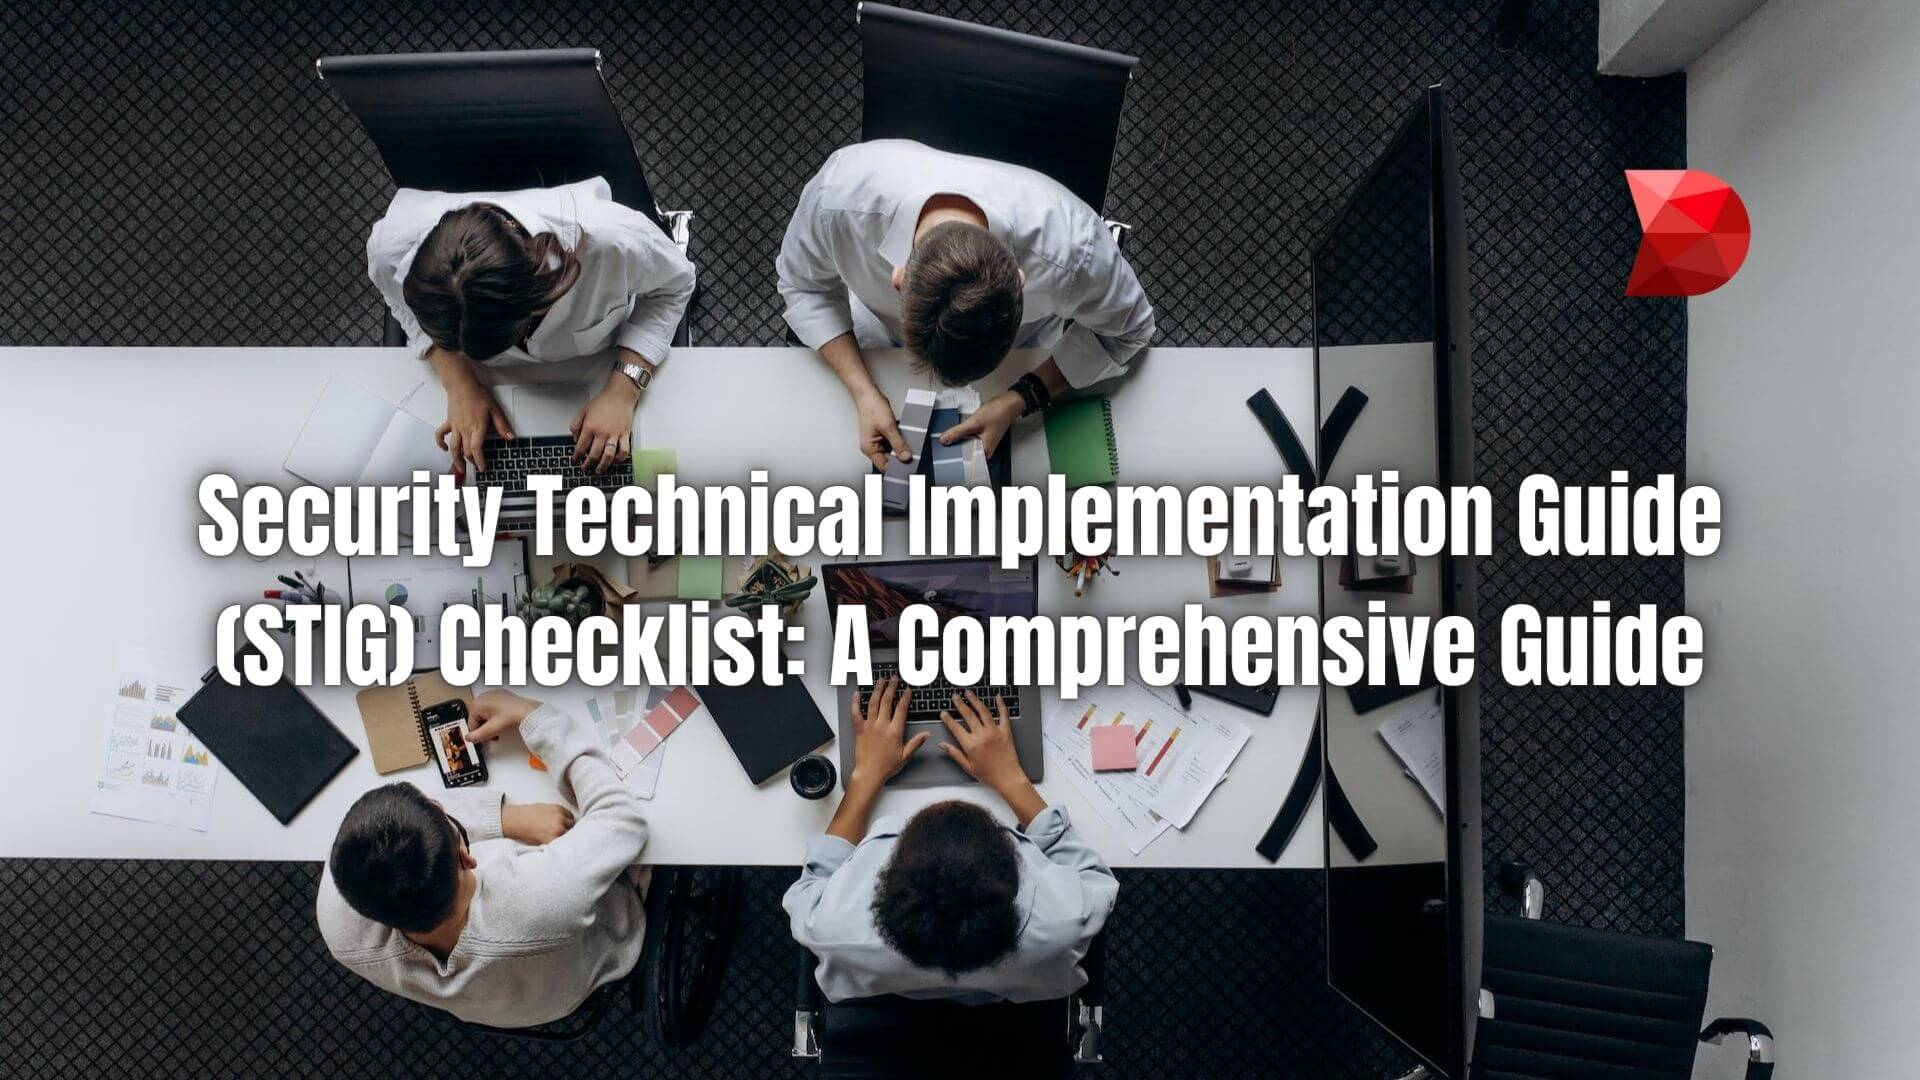 Optimize security protocols with this STIG checklist guide. Click here to uncover the essential steps for a robust implementation strategy.